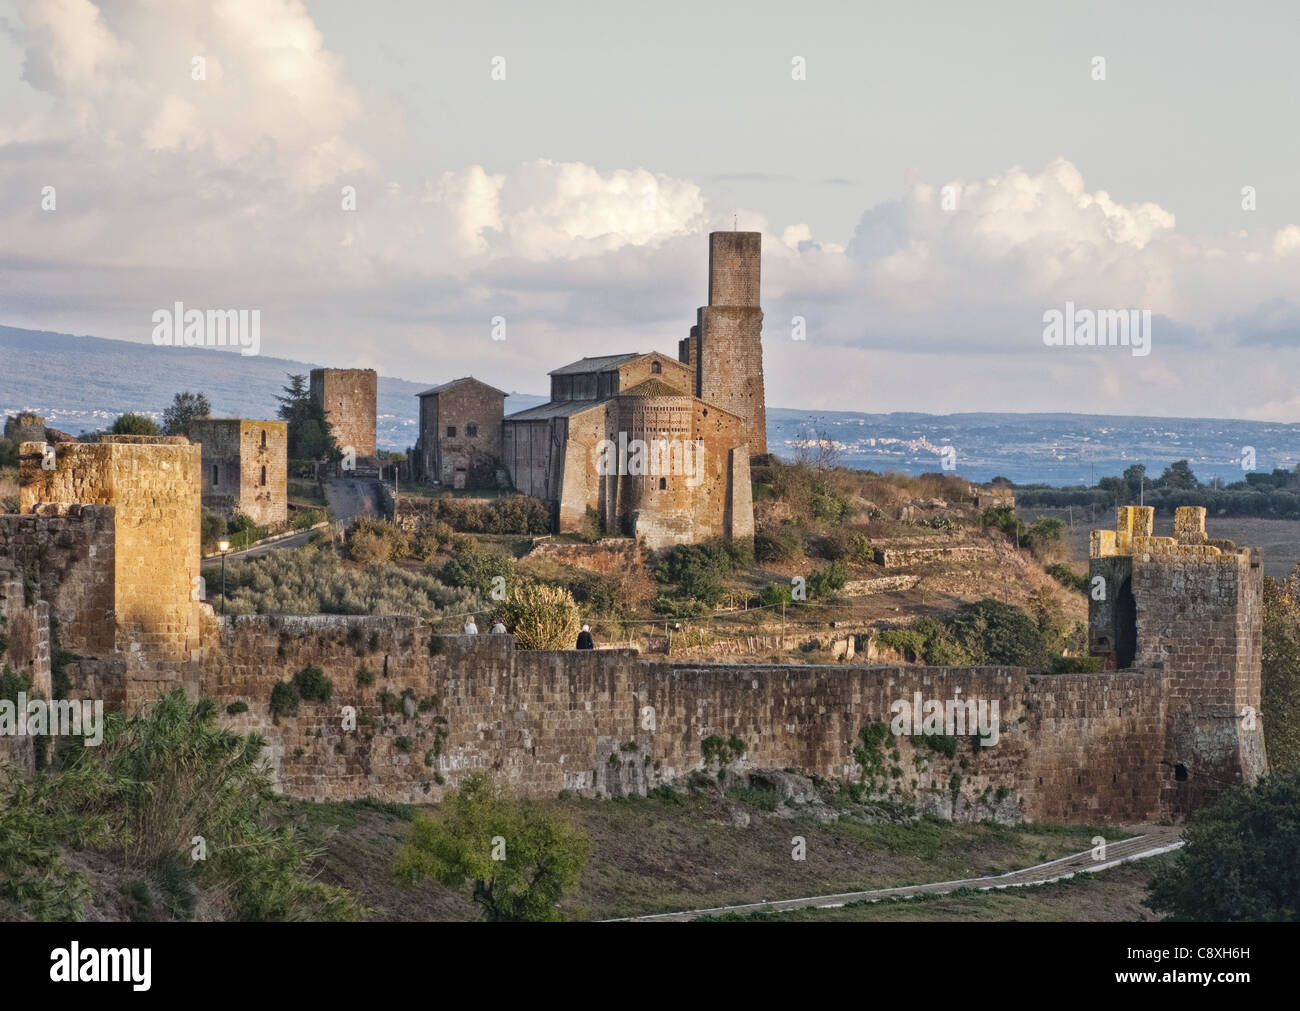 Views of the walls of  uscania and St. Peter's hill,  Italy. Stock Photo